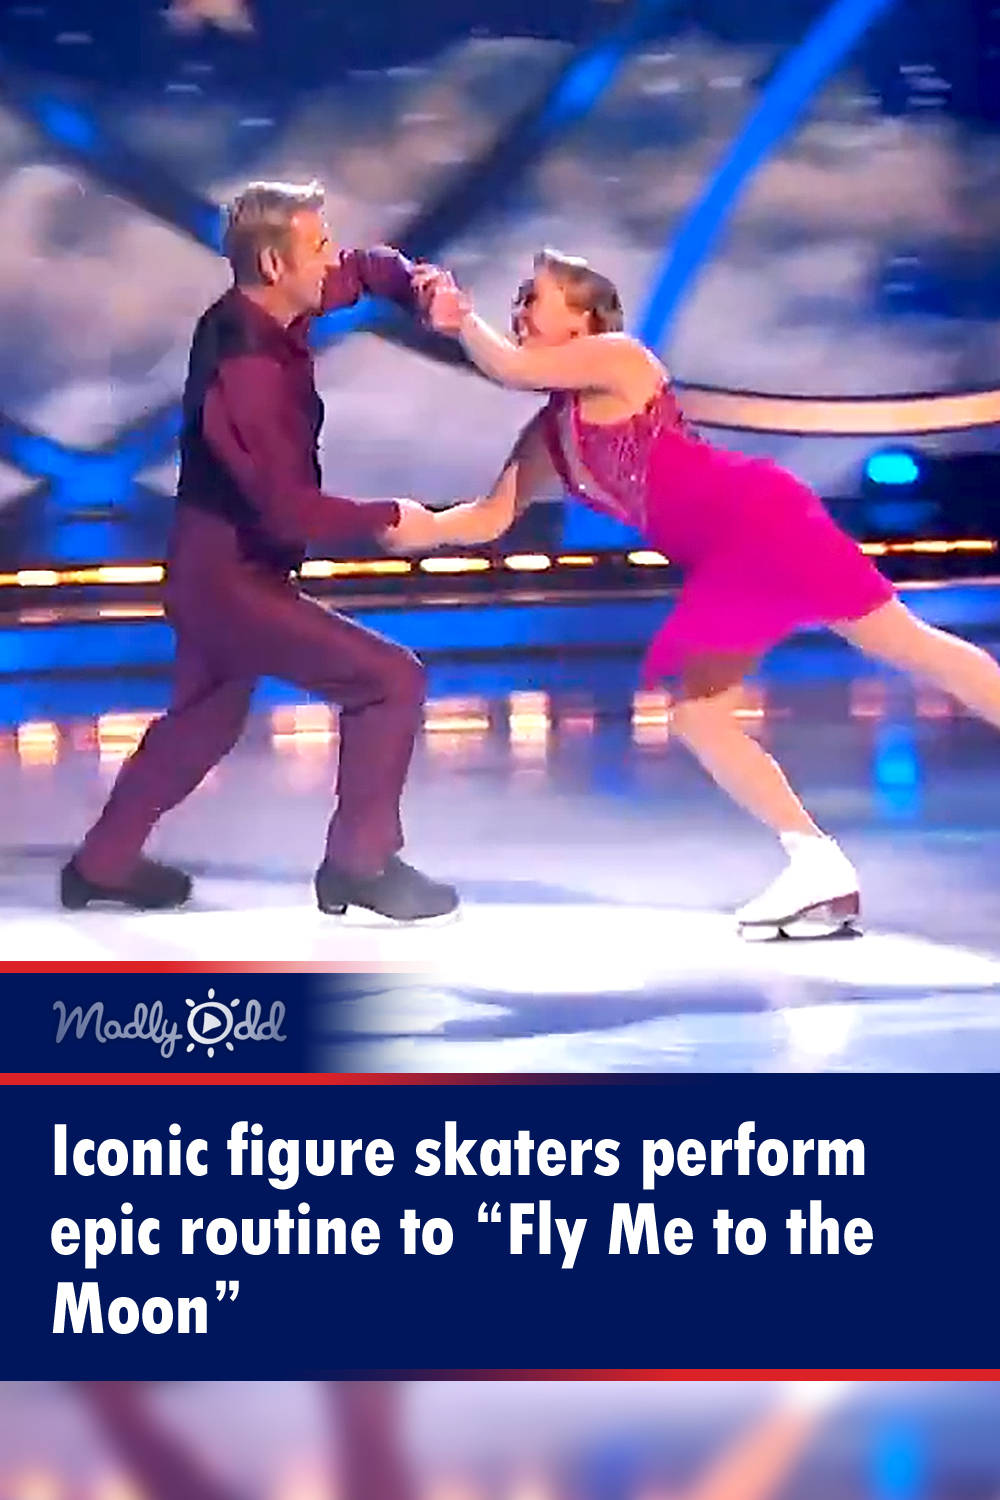 Iconic figure skaters perform epic routine to “Fly Me to the Moon”